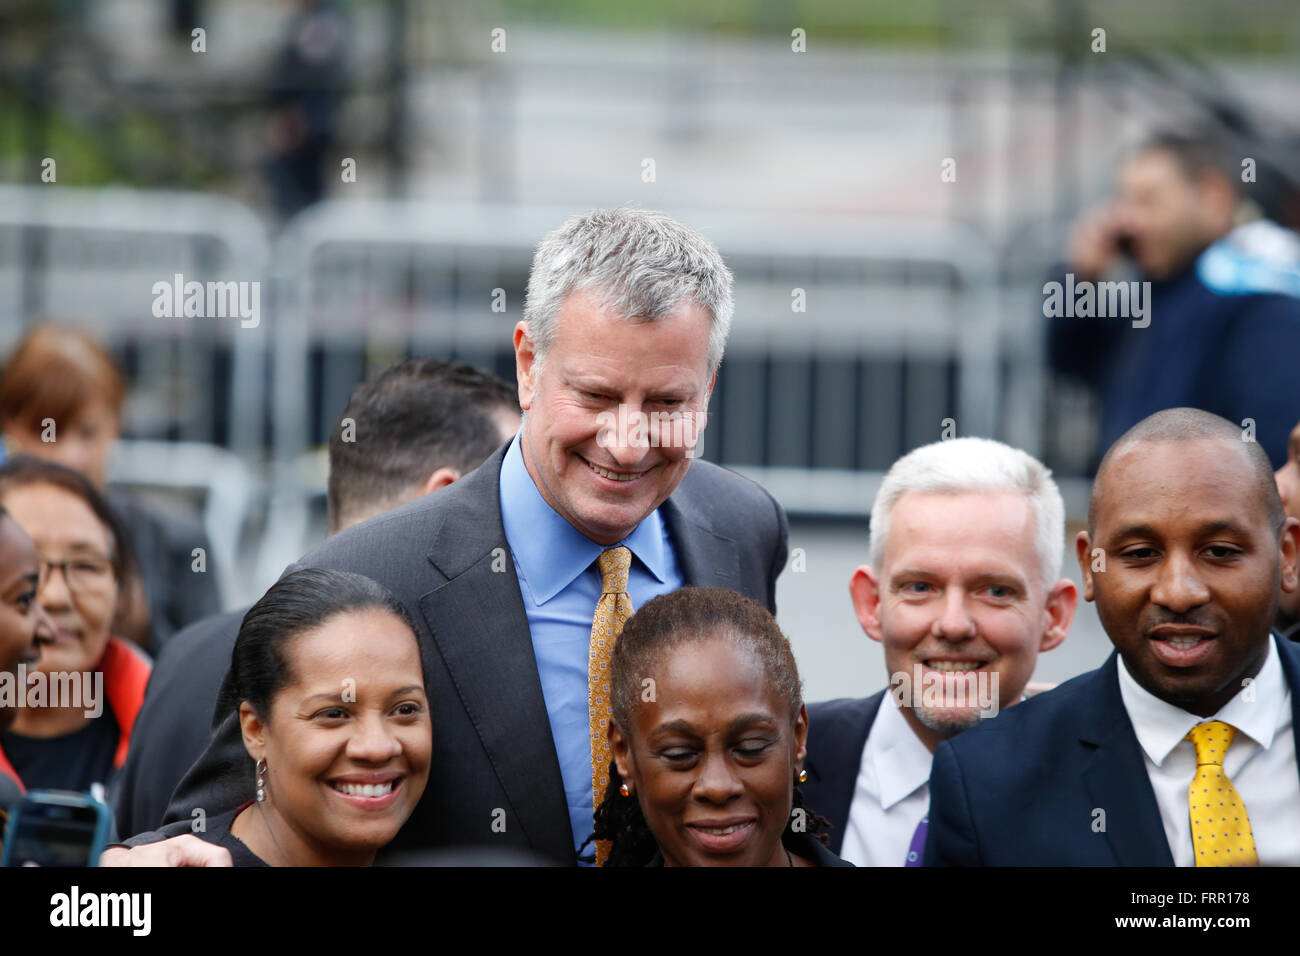 New York City, USA, 23 March 2016: Mayor de Blasio with Chirlane McCray & city council members during a Foley Square rally in celebration of NYC's new mandatory inclusionary zoning law. Credit:  Andrew Katz/Alamy Live News Stock Photo